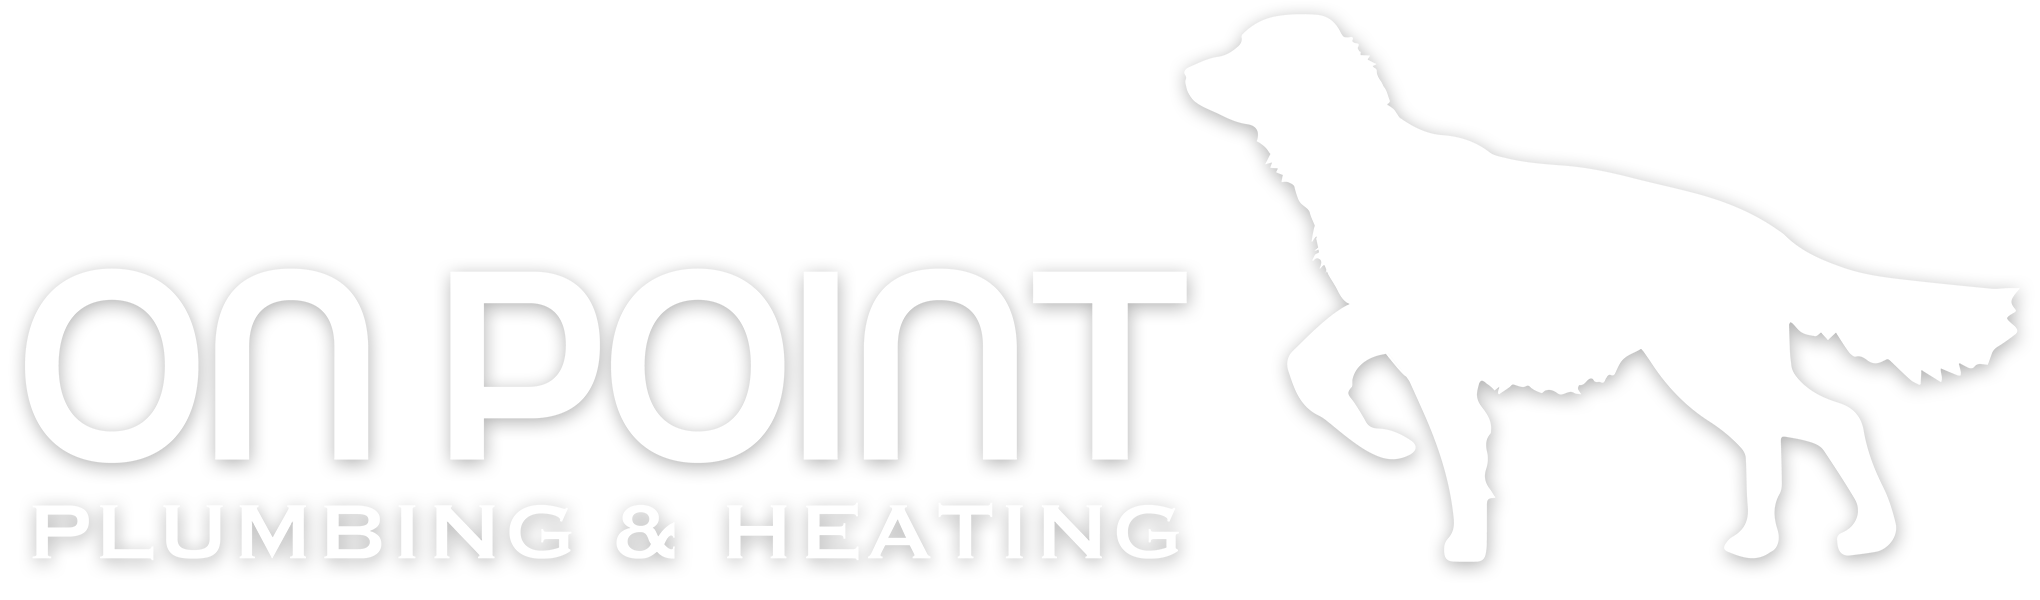 On Point Plumbing and Heating with Lincoln the Dog logo